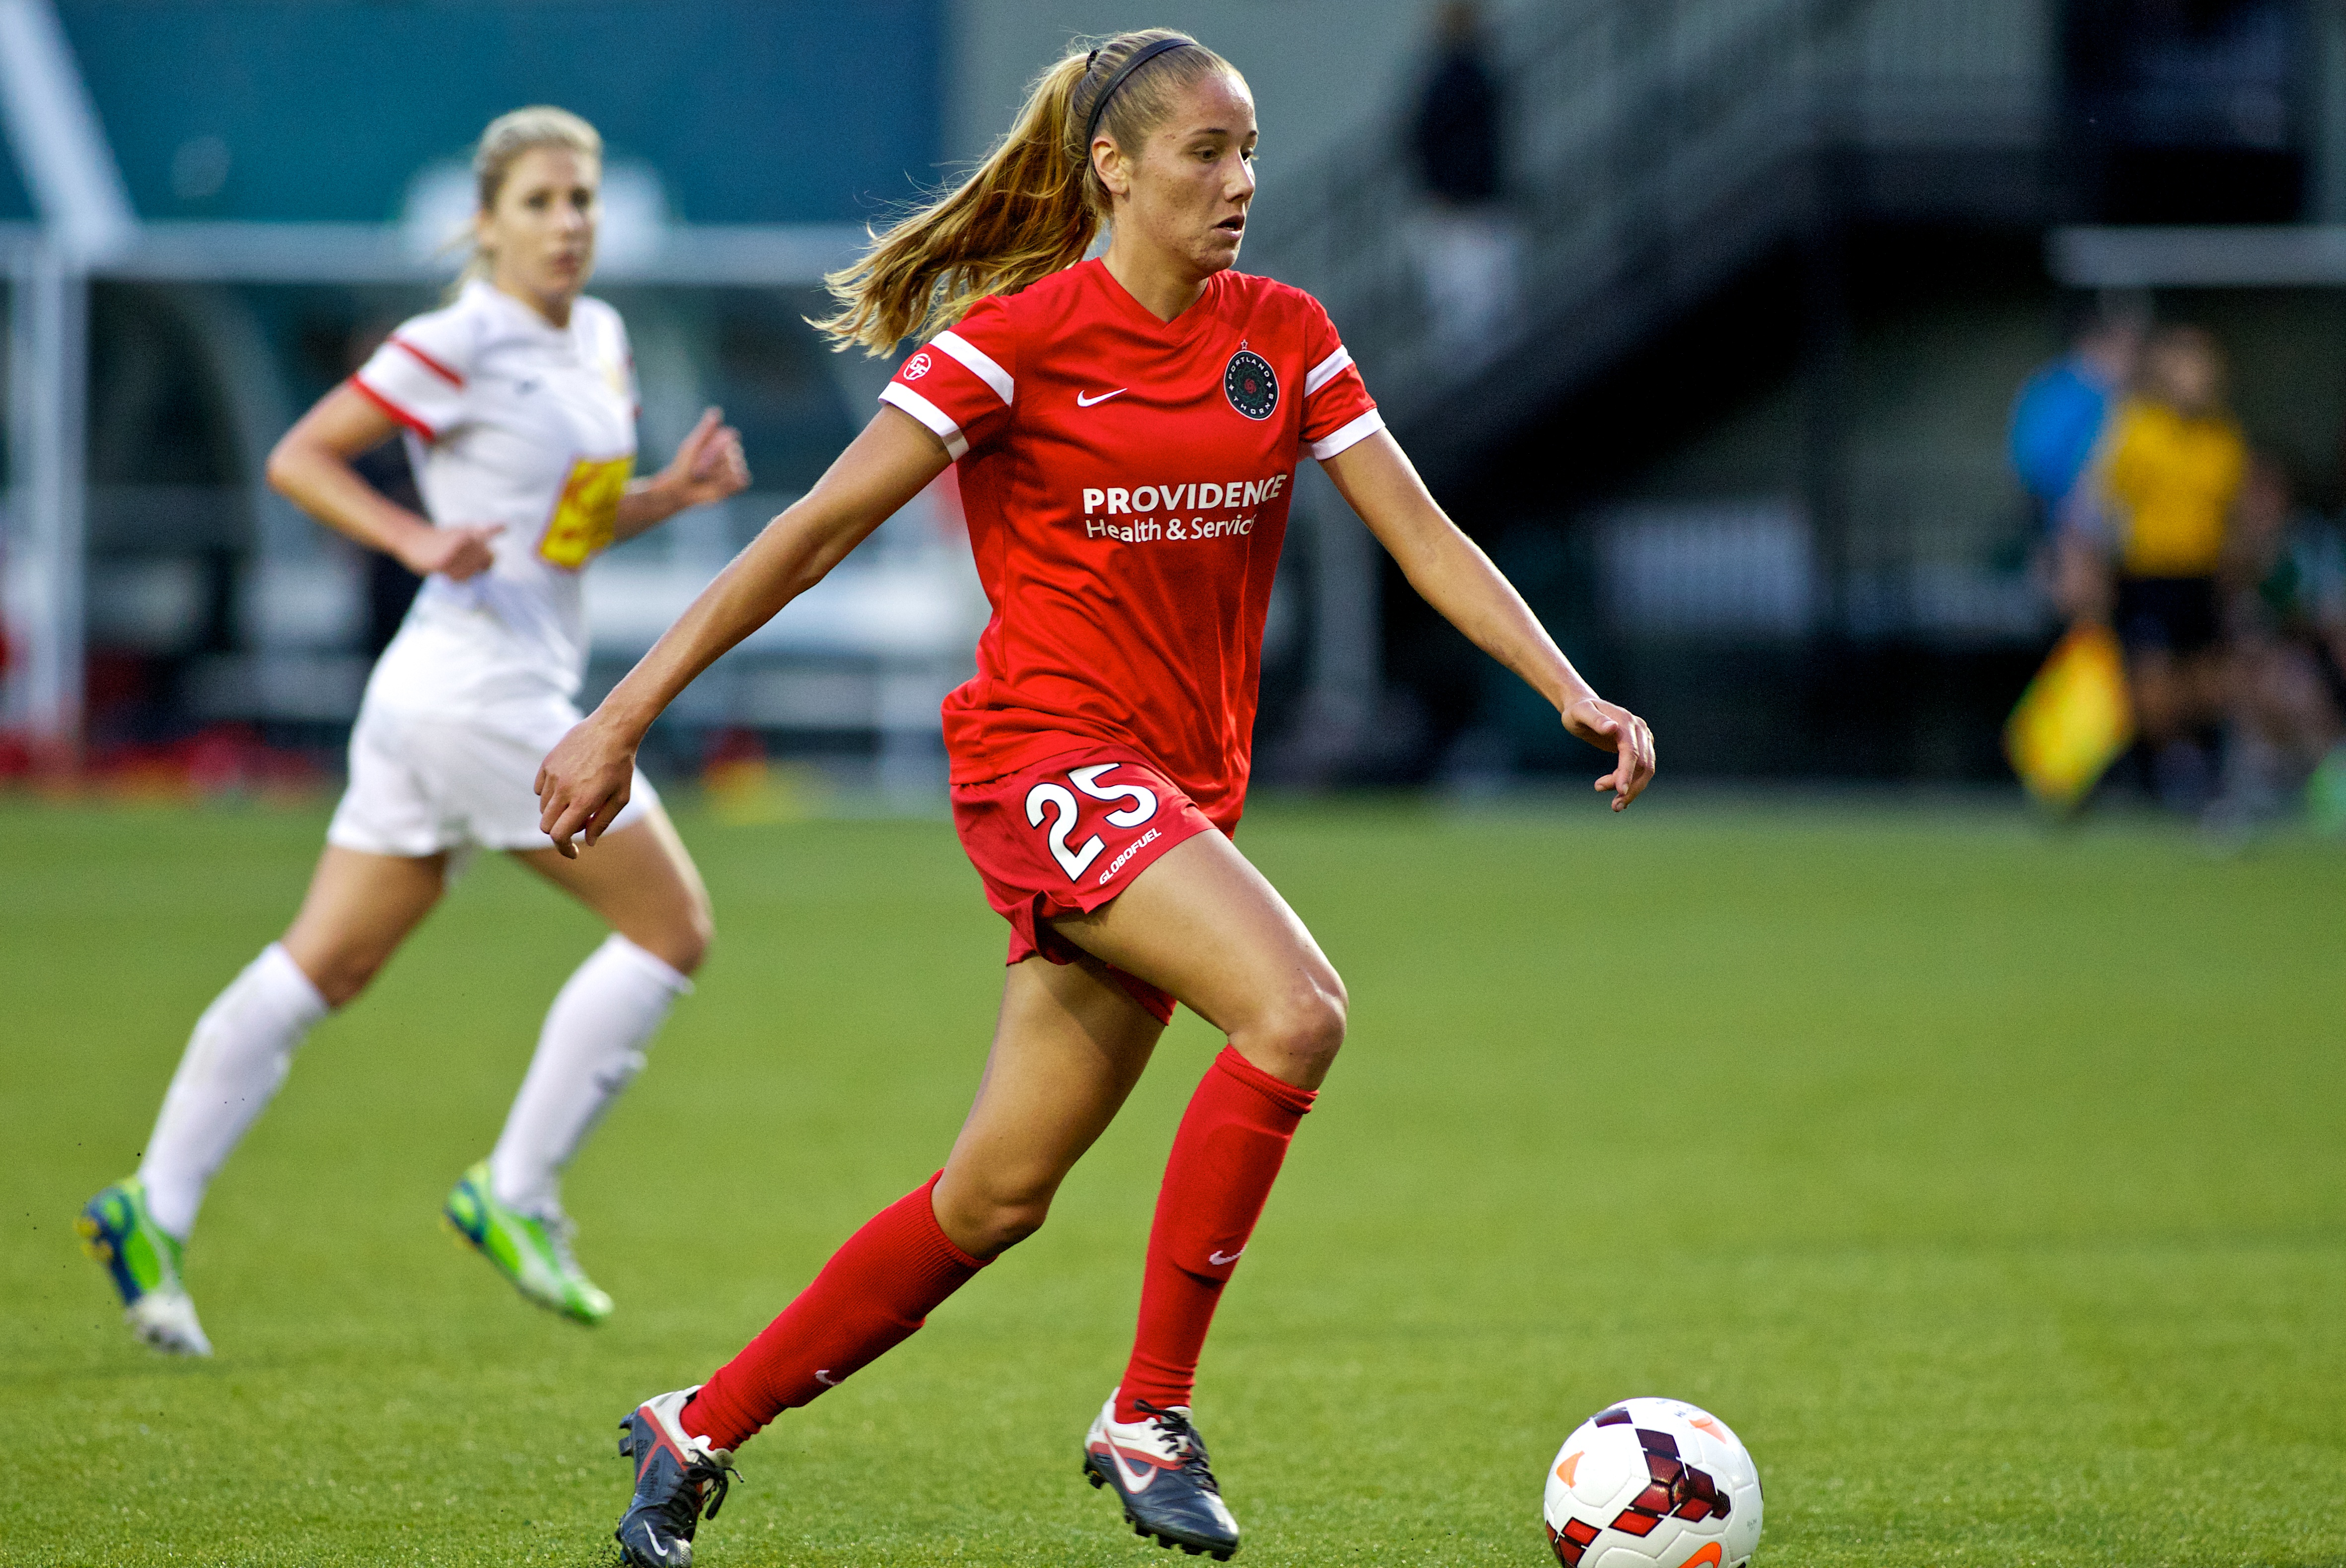 Niemiec has played in 11 games this season as a rookie in Portland (Photo credit: Craig Mitchelldyer/Portland Thorns FC)